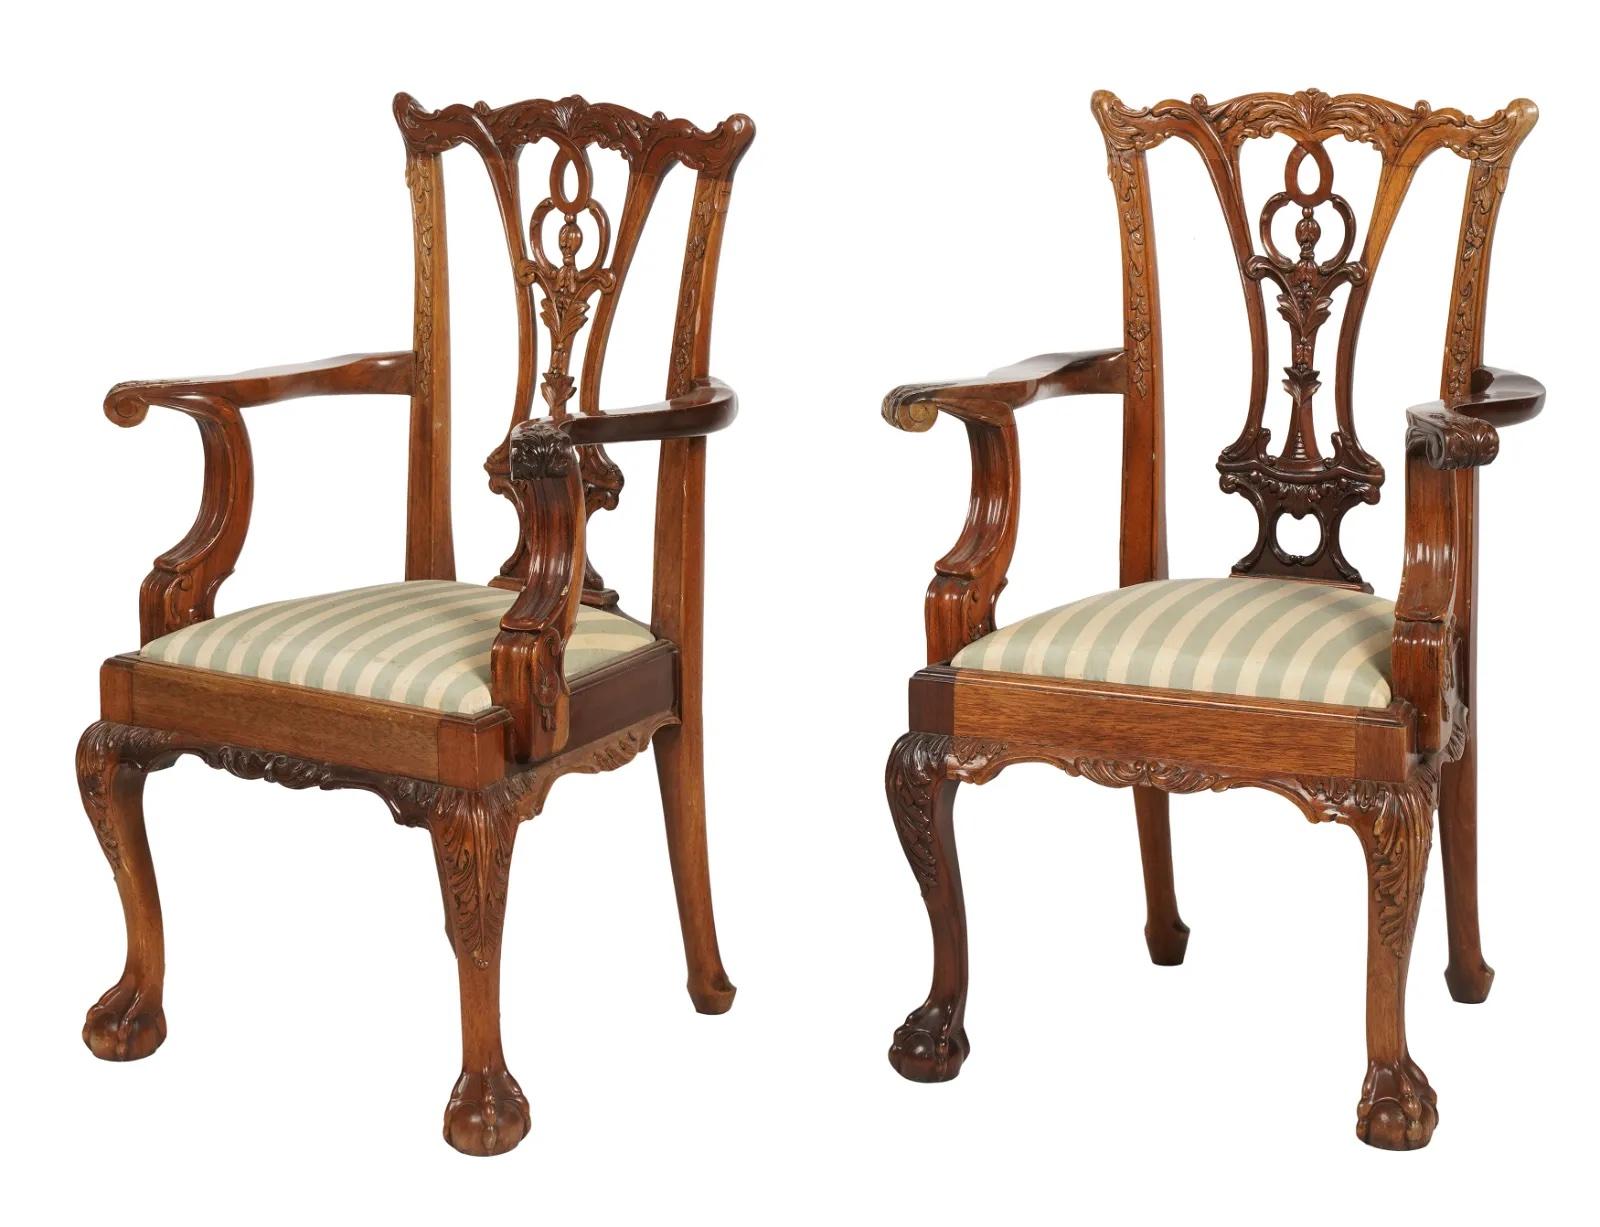 Pair of Early 20th Century Carved Mahogany Chippendale Style Child's Chair - each with a removable seat cushion. Intricate carving details throughout. Ball and claw carved feet.